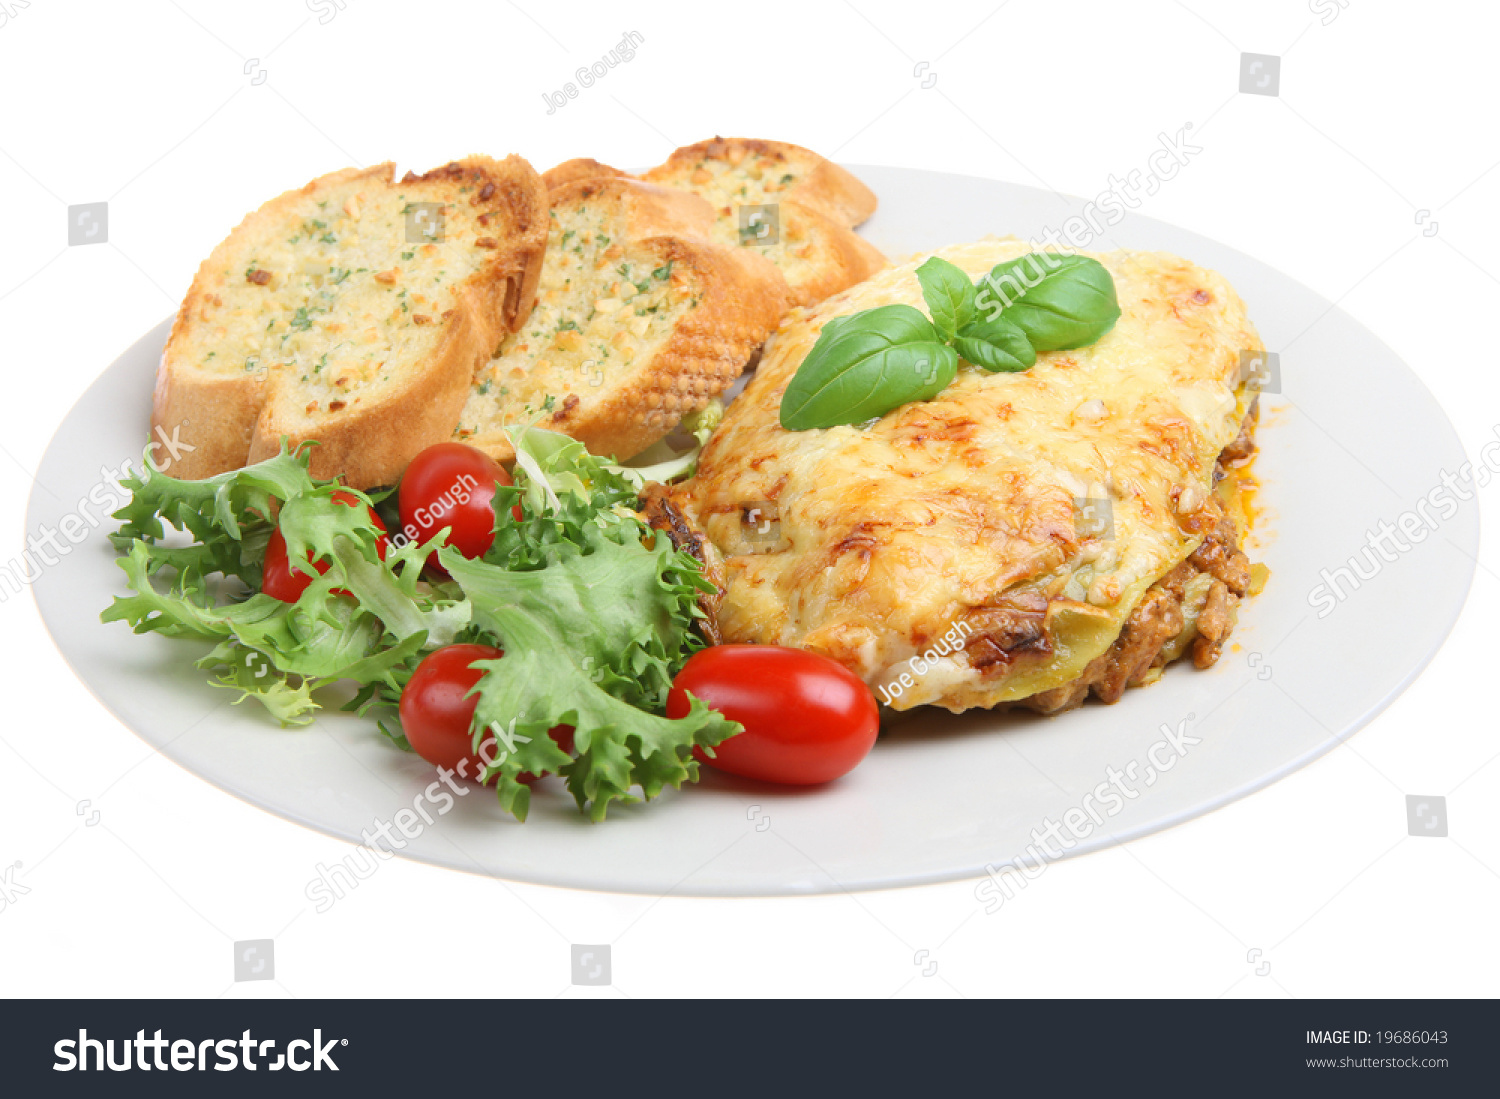 Lasagna With Garlic Bread And Salad Stock Photo 19686043 : Shutterstock